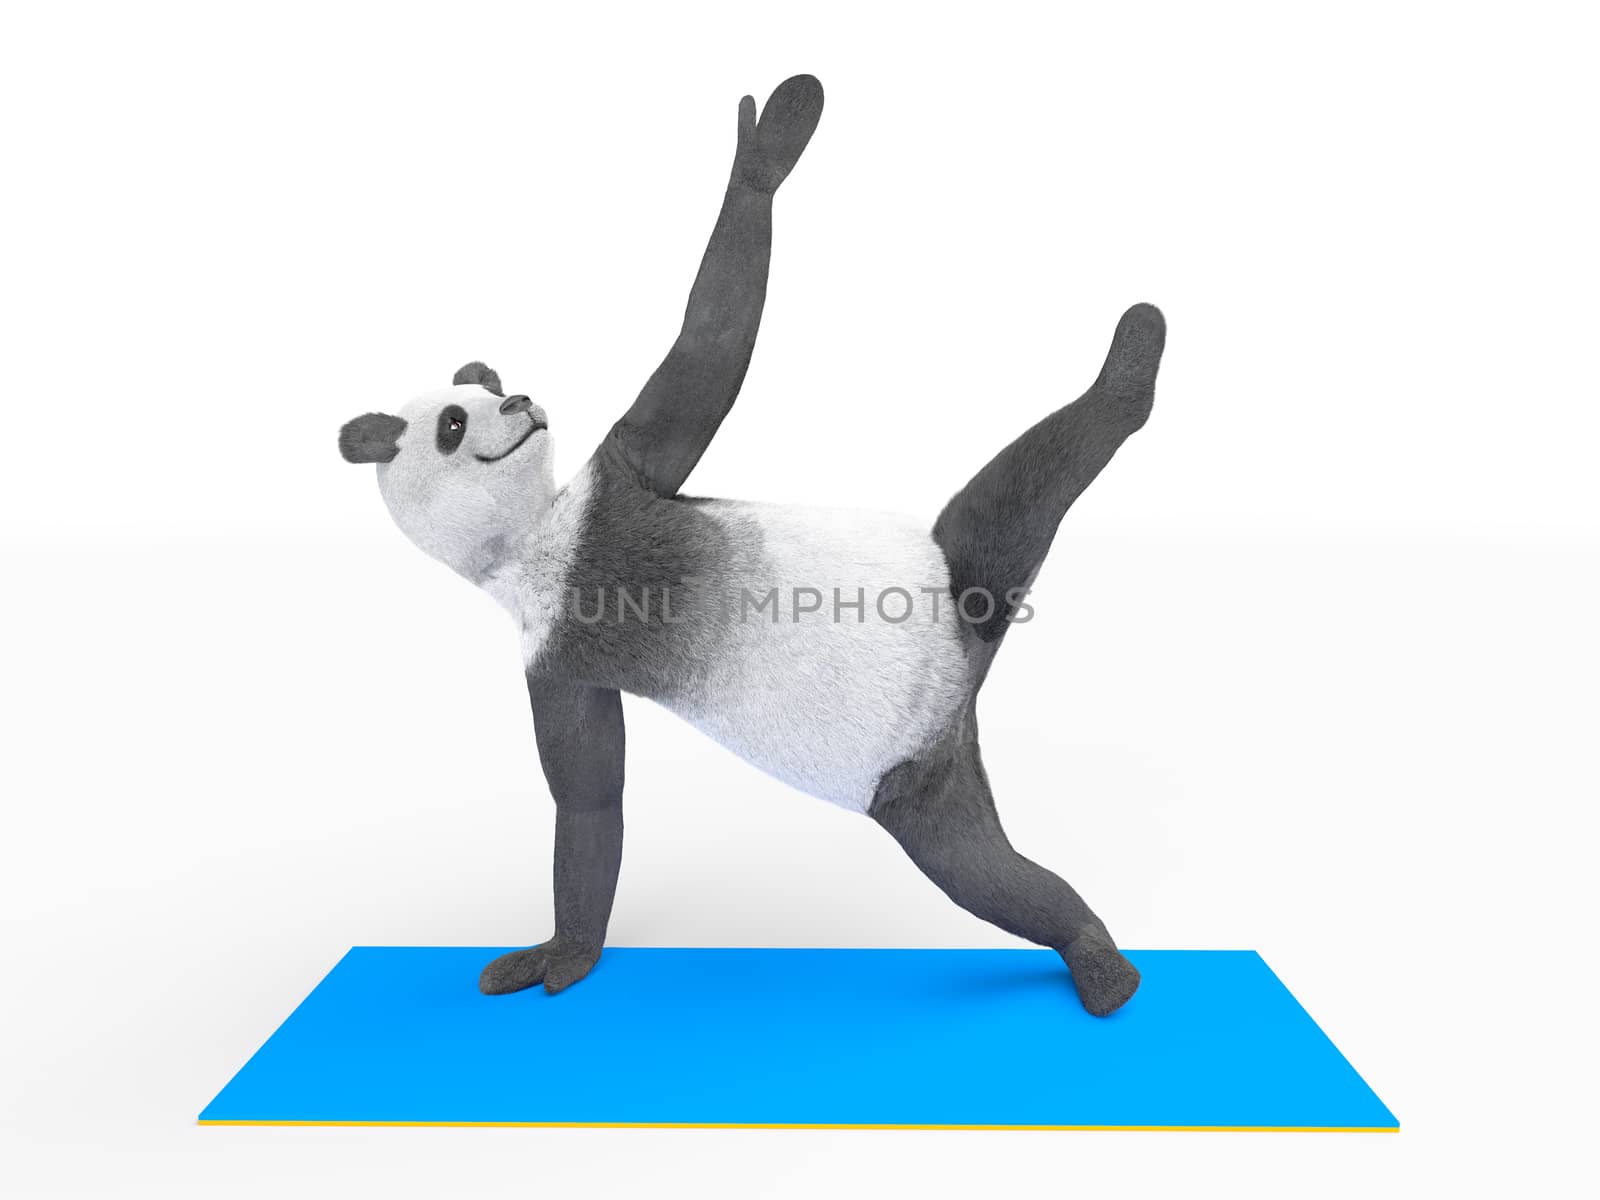 yogi practicing asana. Panda stands on the one hand and one foot, the other limbs are raised in the air